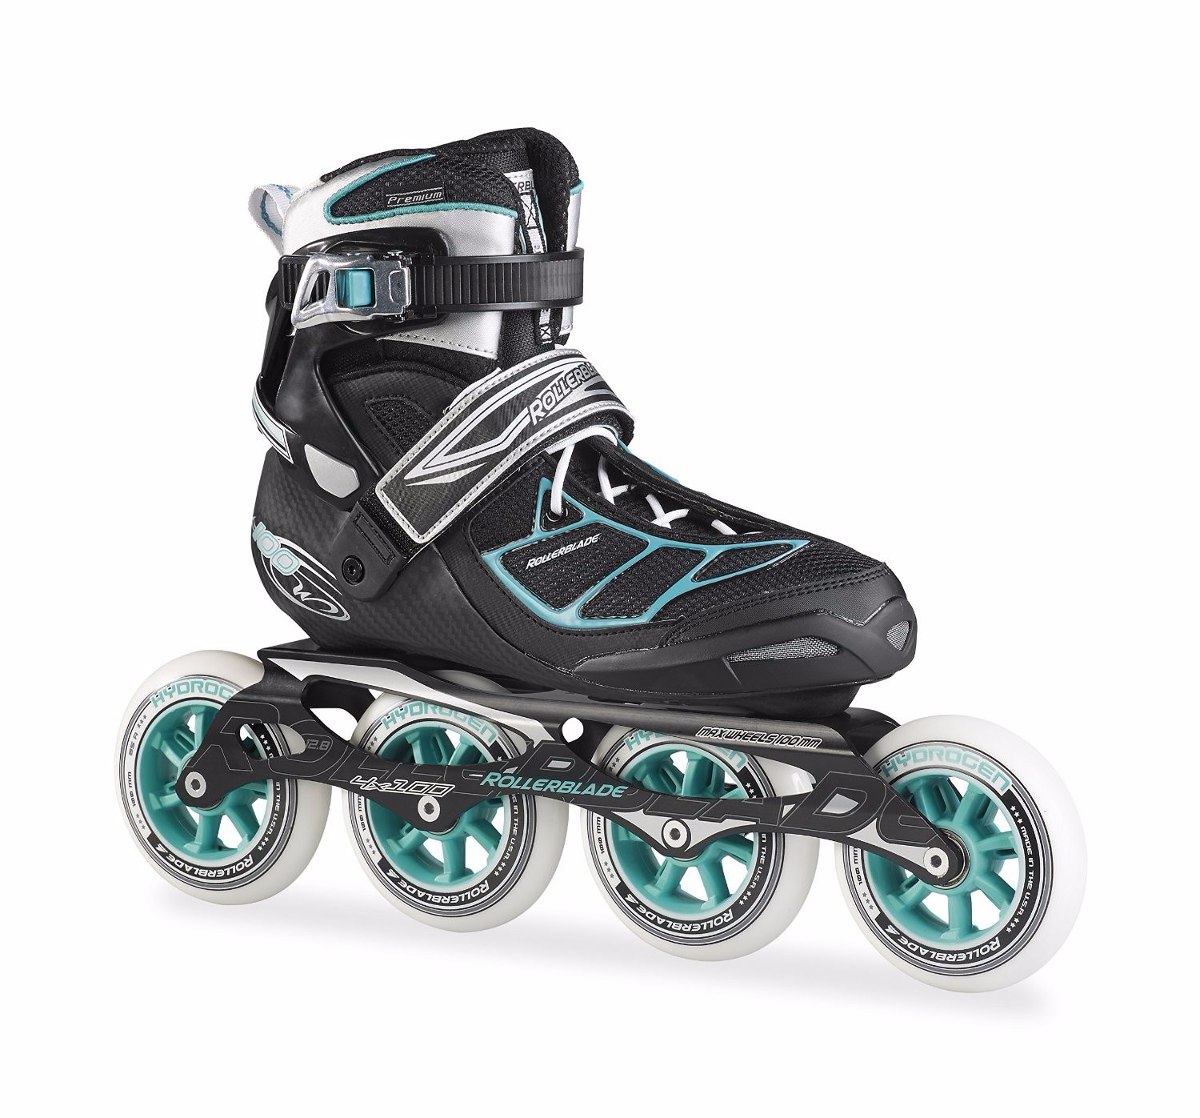 patines-lineales-mujer-rollerblade-tempest-100-importados-D_NQ_NP_279201-MLM20287538354_042015-F